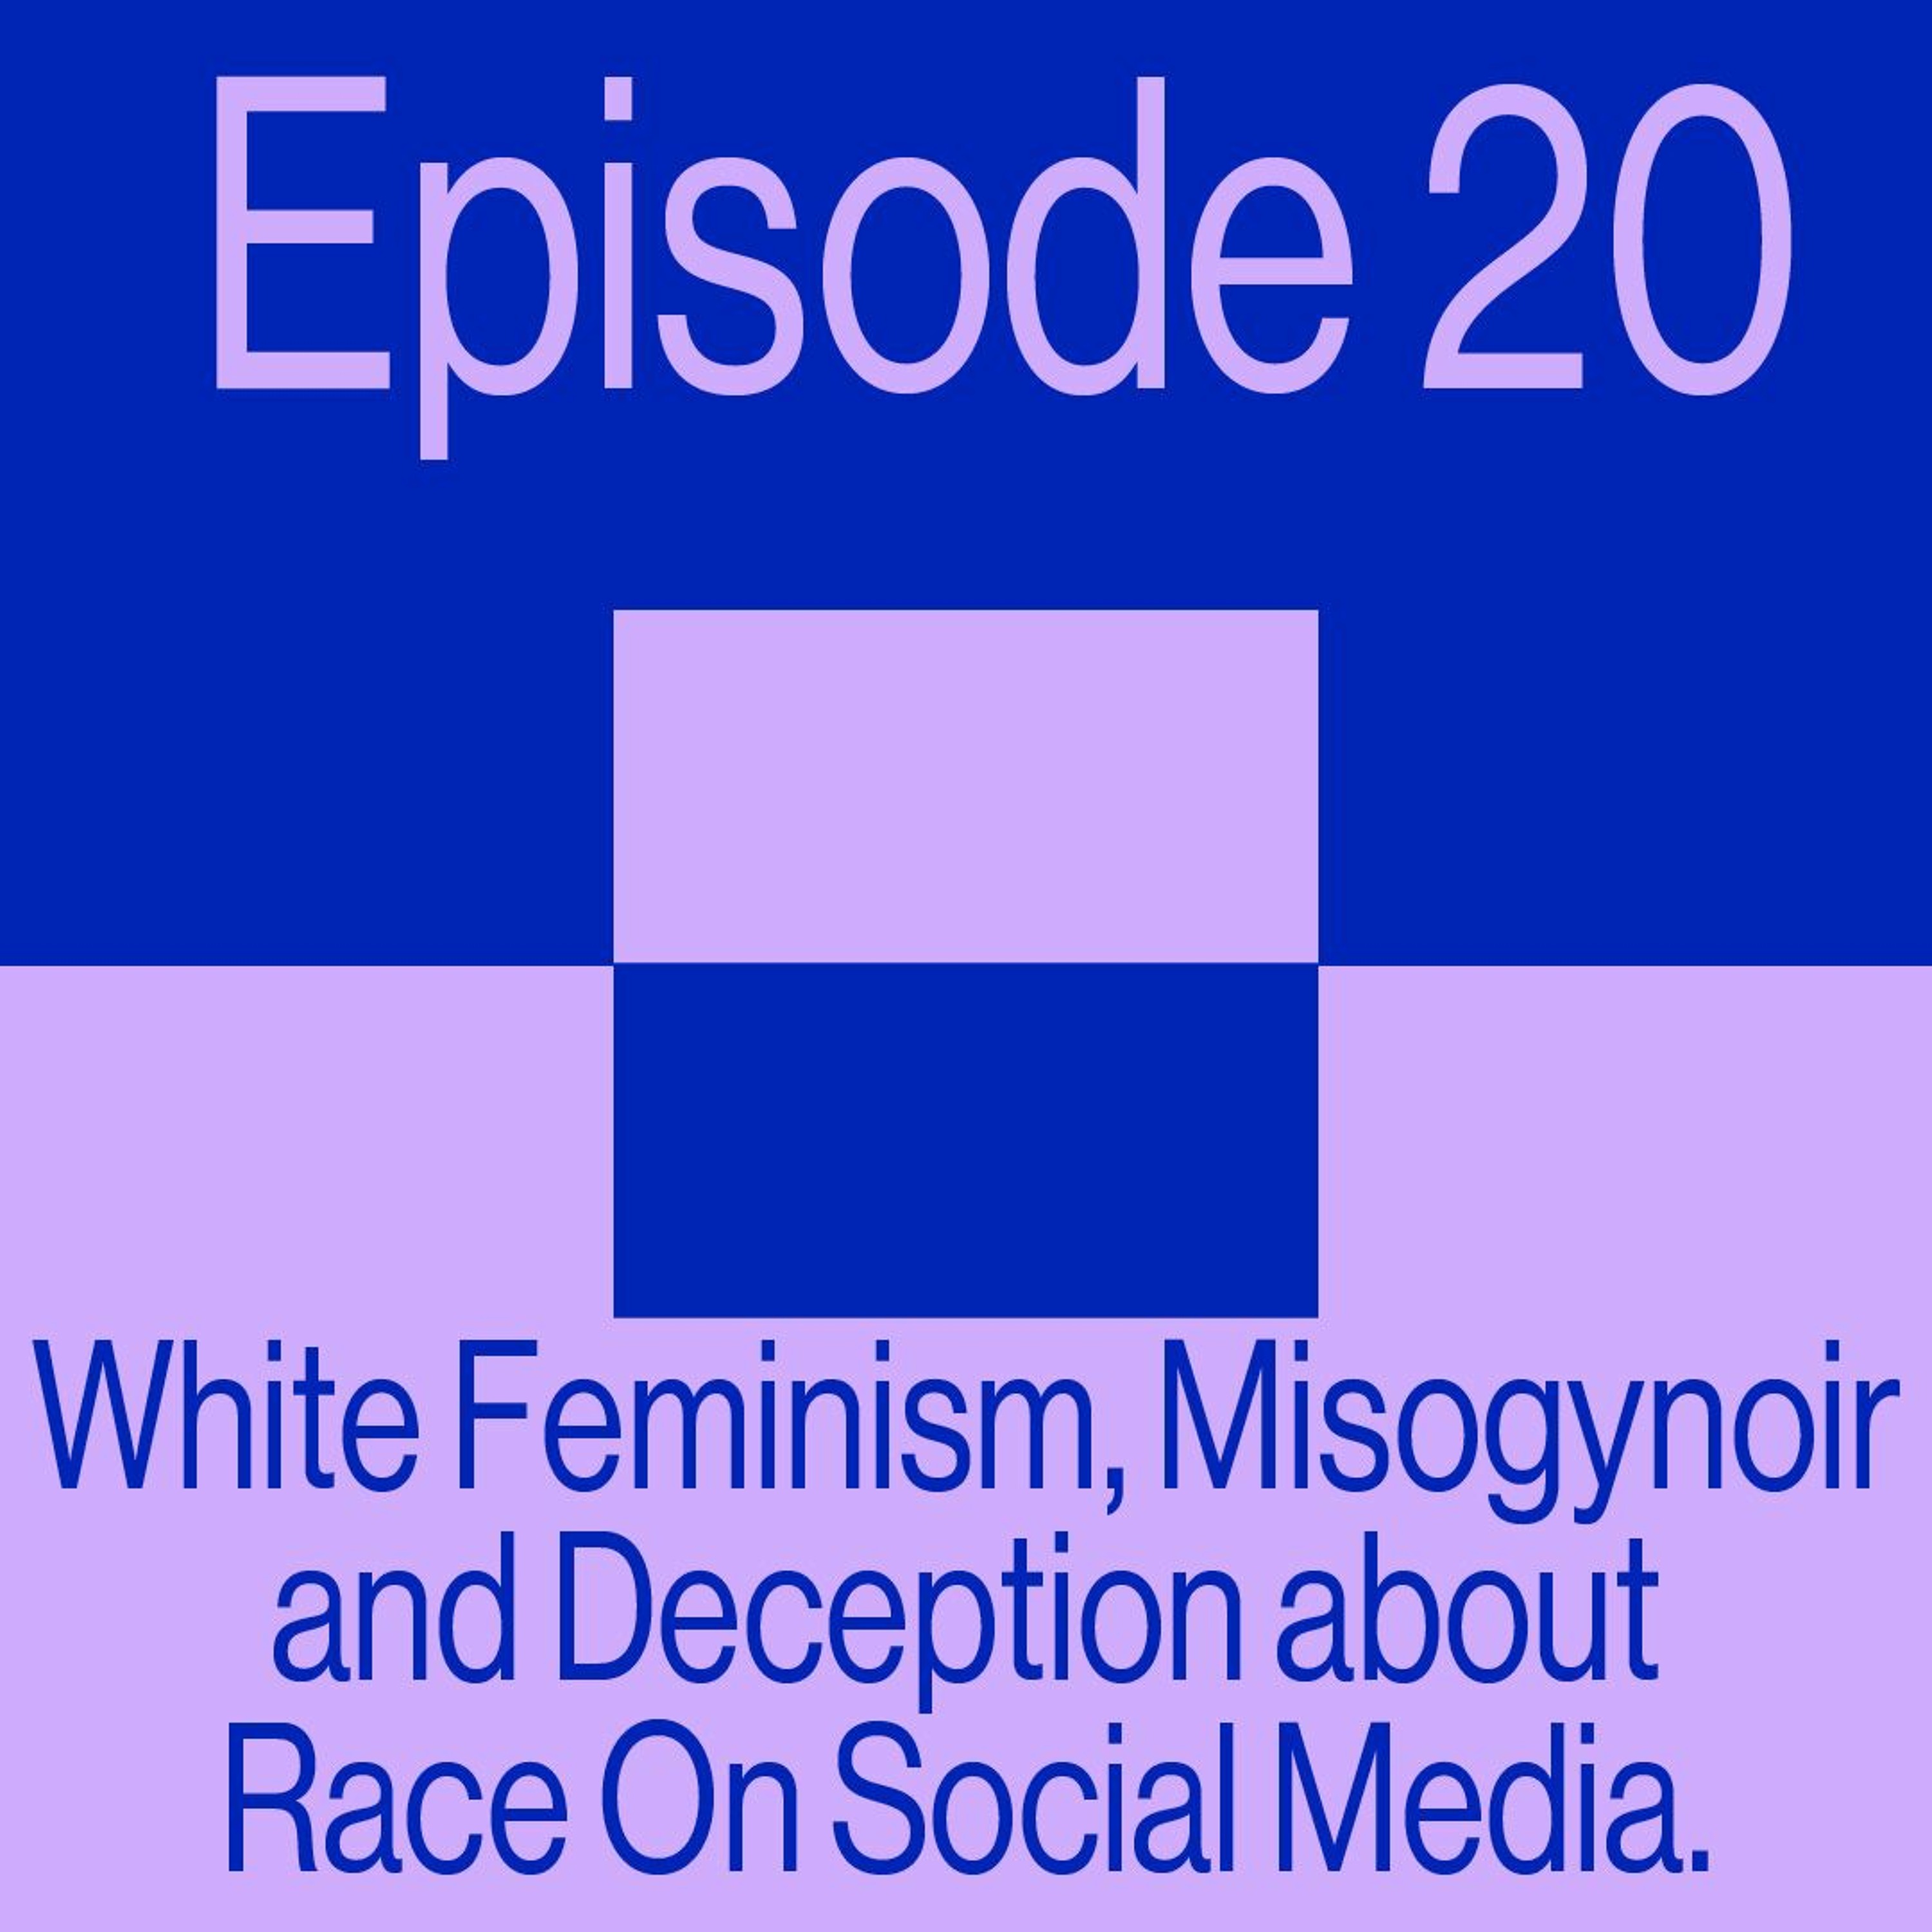 Episode 20: White Feminism, Misogynoir, And Deception About Race On Social Media